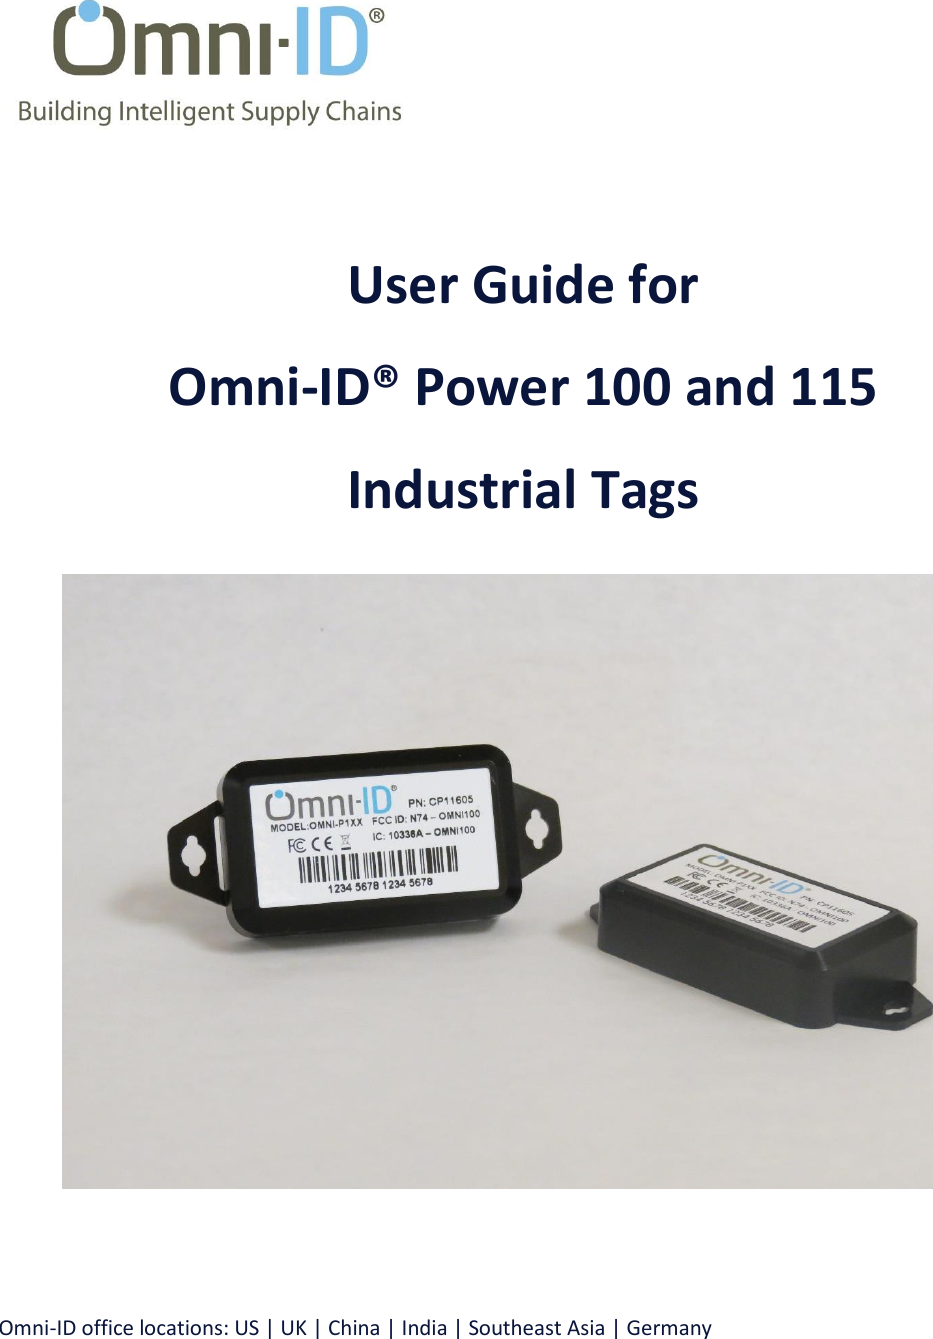     User Guide for Omni-ID® Power 100 and 115 Industrial Tags     Omni-ID office locations: US | UK | China | India | Southeast Asia | Germany 